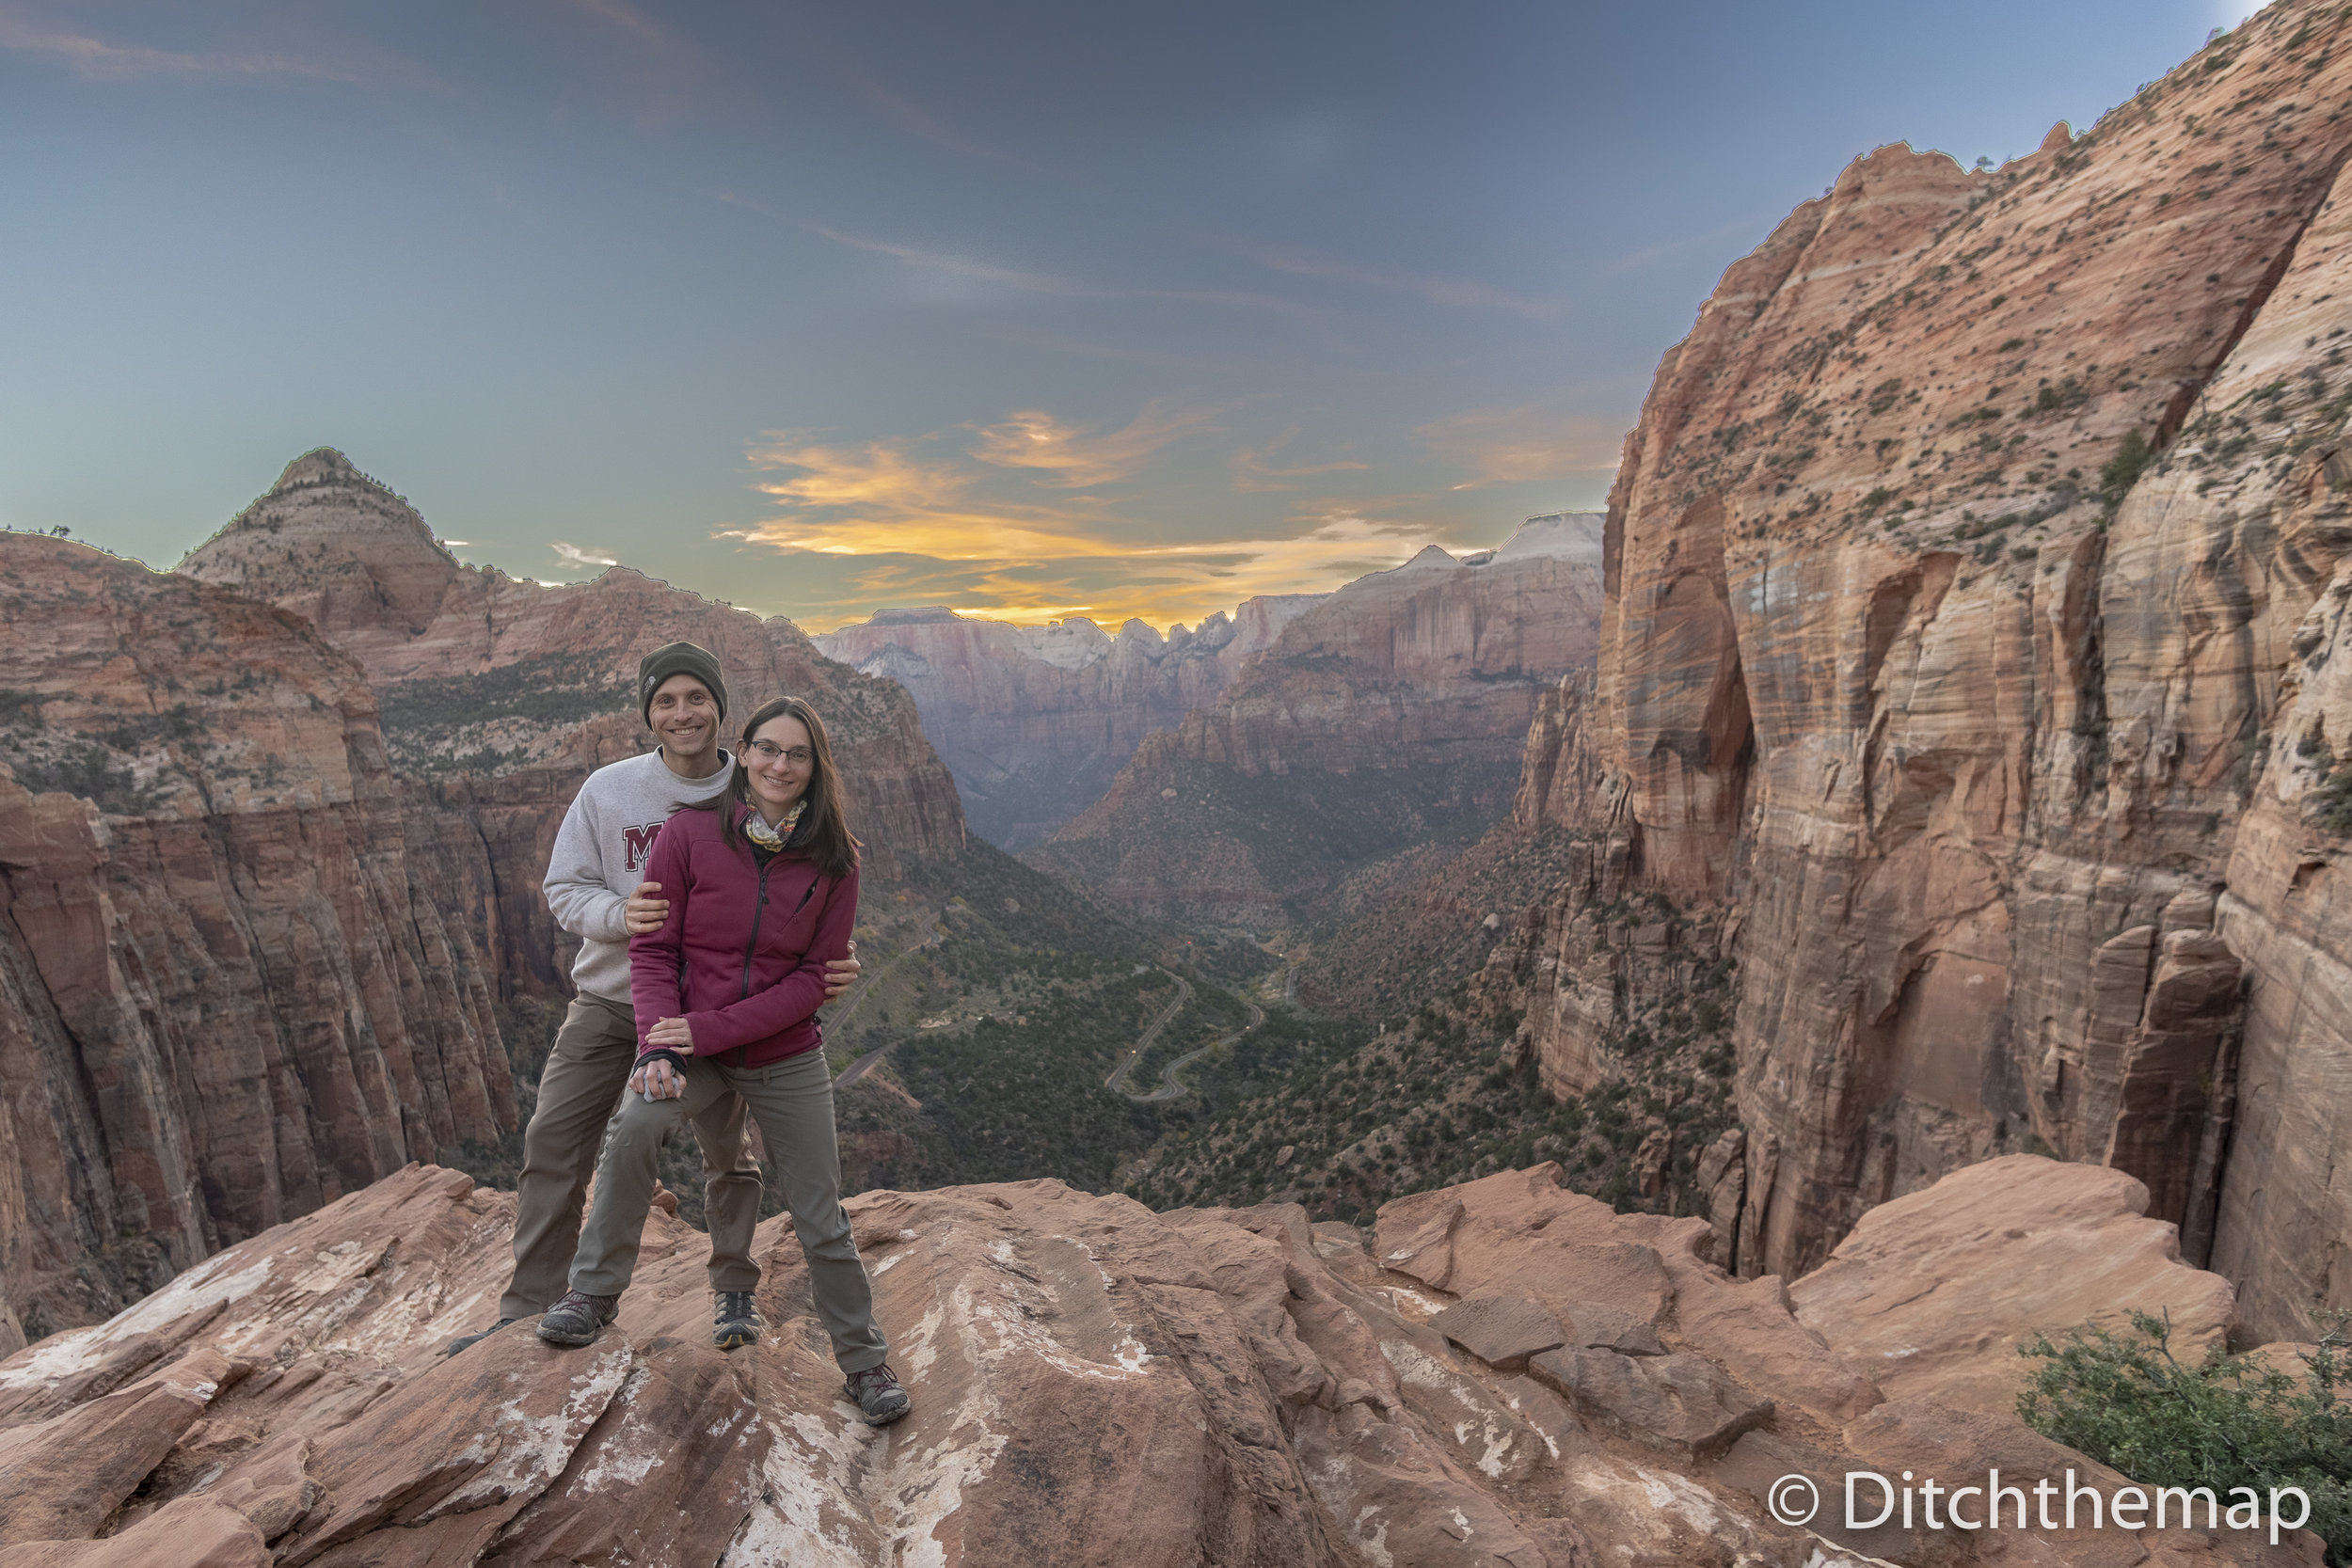 America claims 418 national park sites, according to the national park foundation. An Overview Of Zion Nation Park S Top 2 Hikes The Narrows Angel S Landing Travel Blog And World Class Photography Travel Blog Ditch The Map